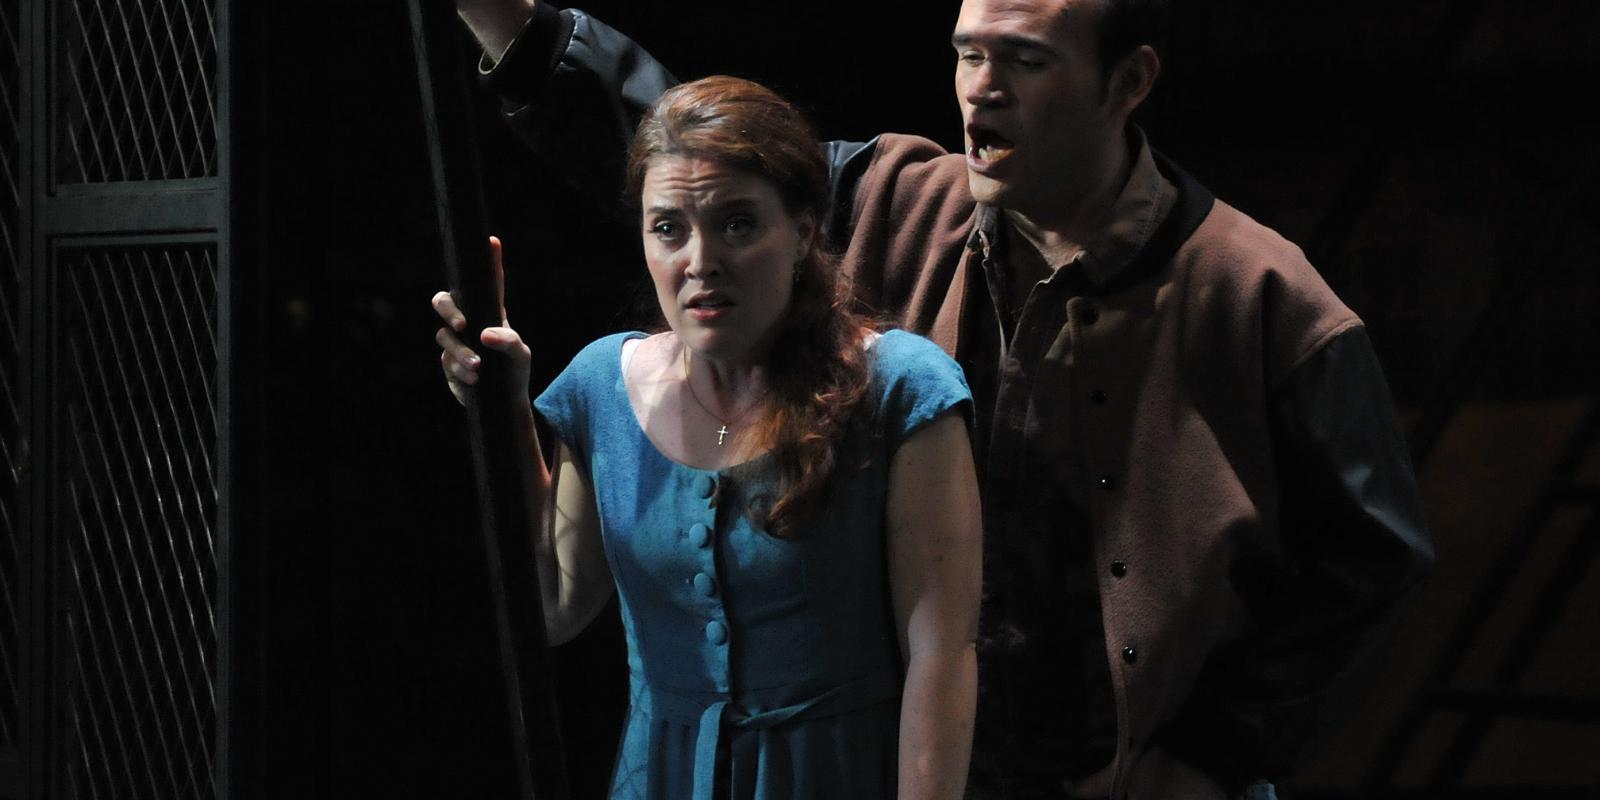 man standing behind woman in blue dress in ENO's Rigoletto